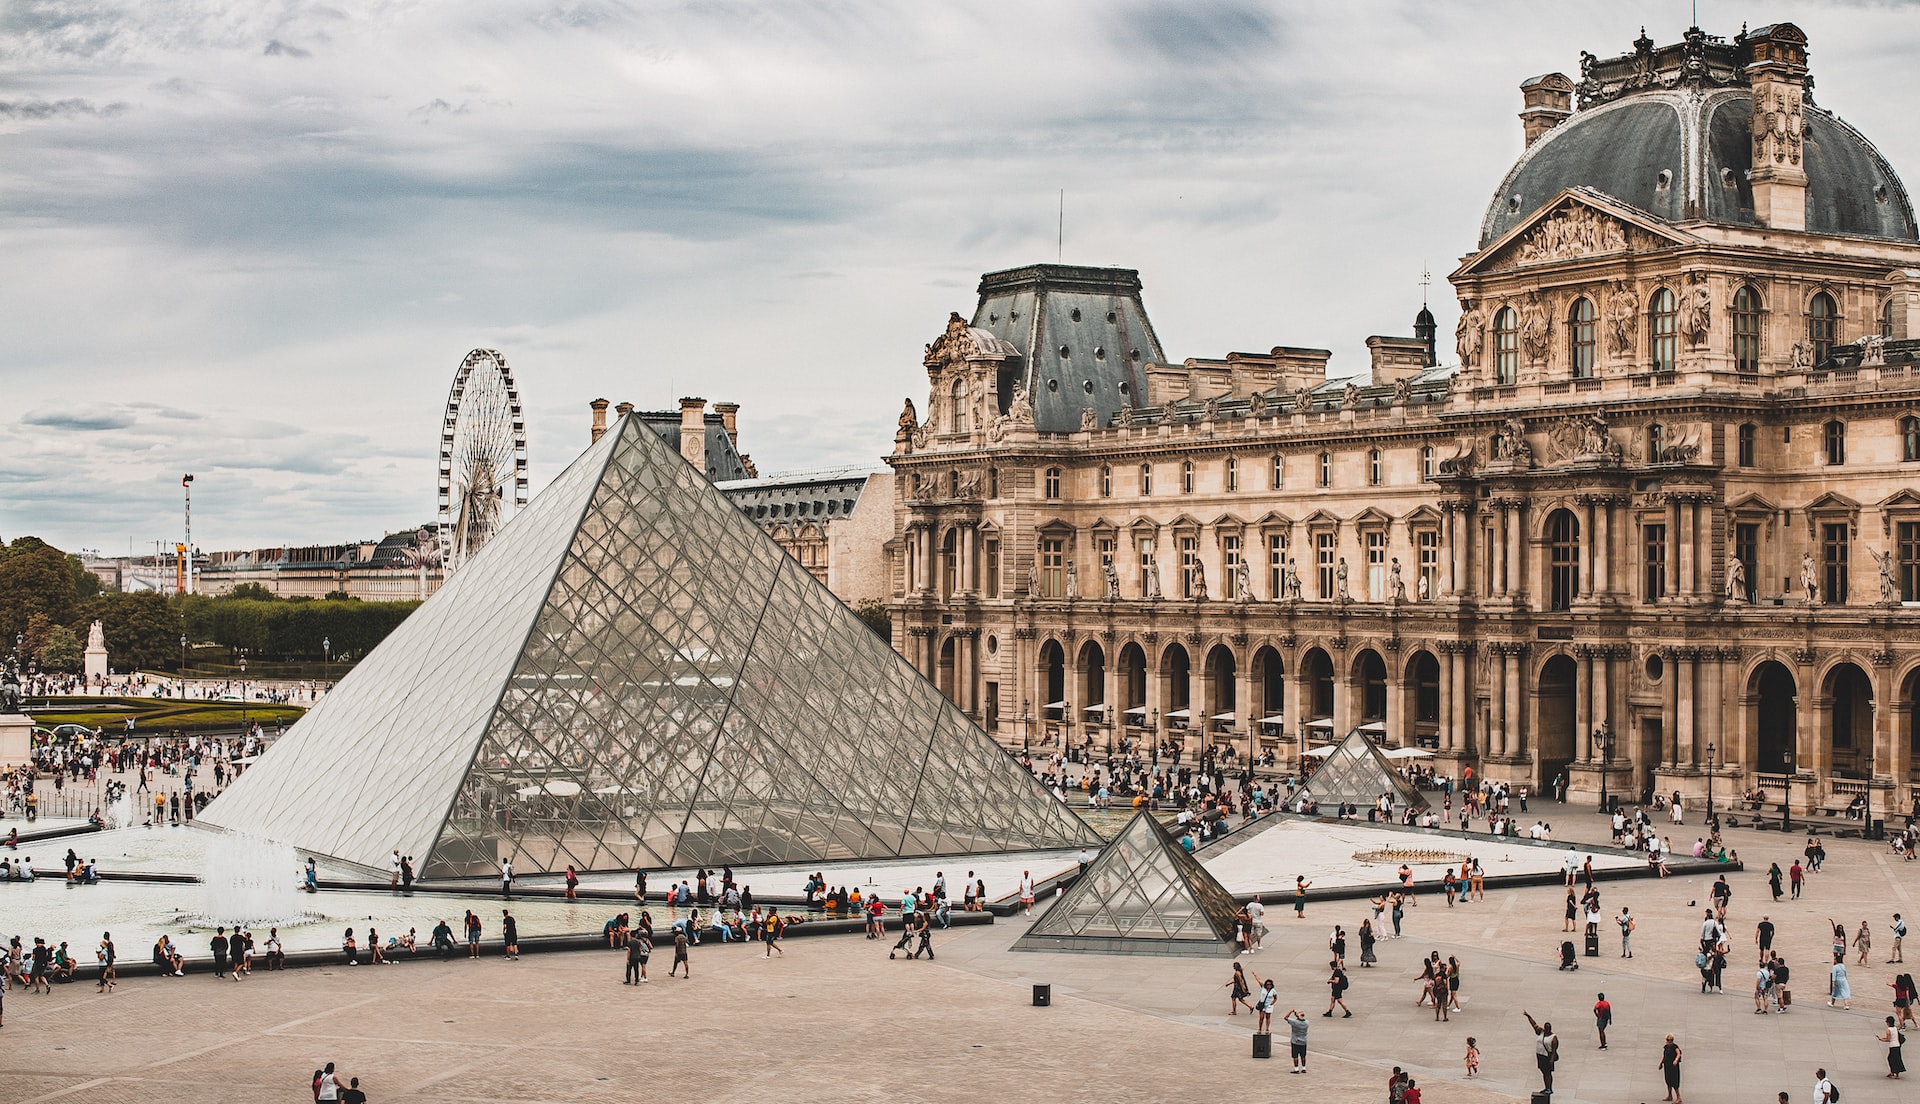 A view of the Louvre and its famous pyramids.